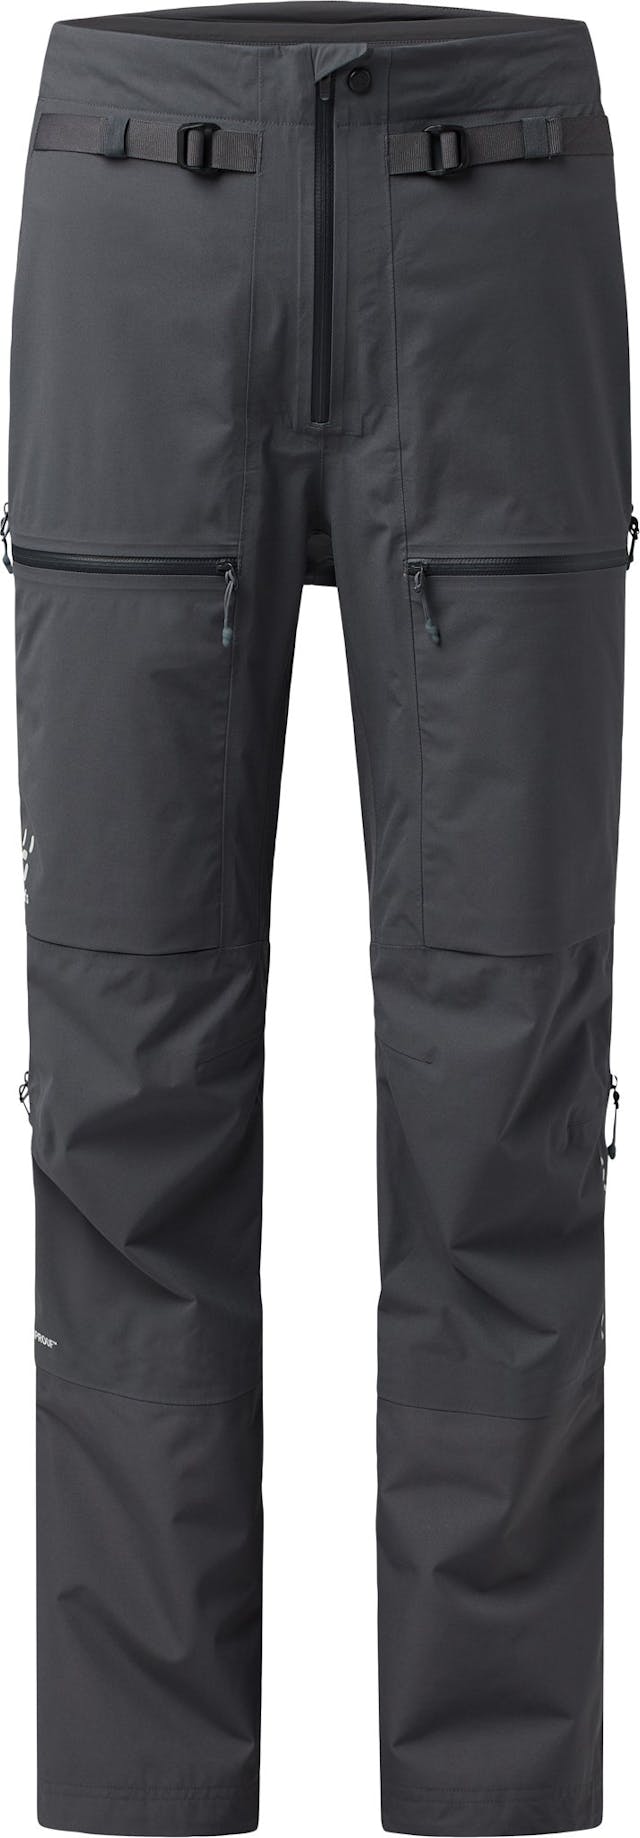 Product image for L.I.M Touring Proof Pant - Women's